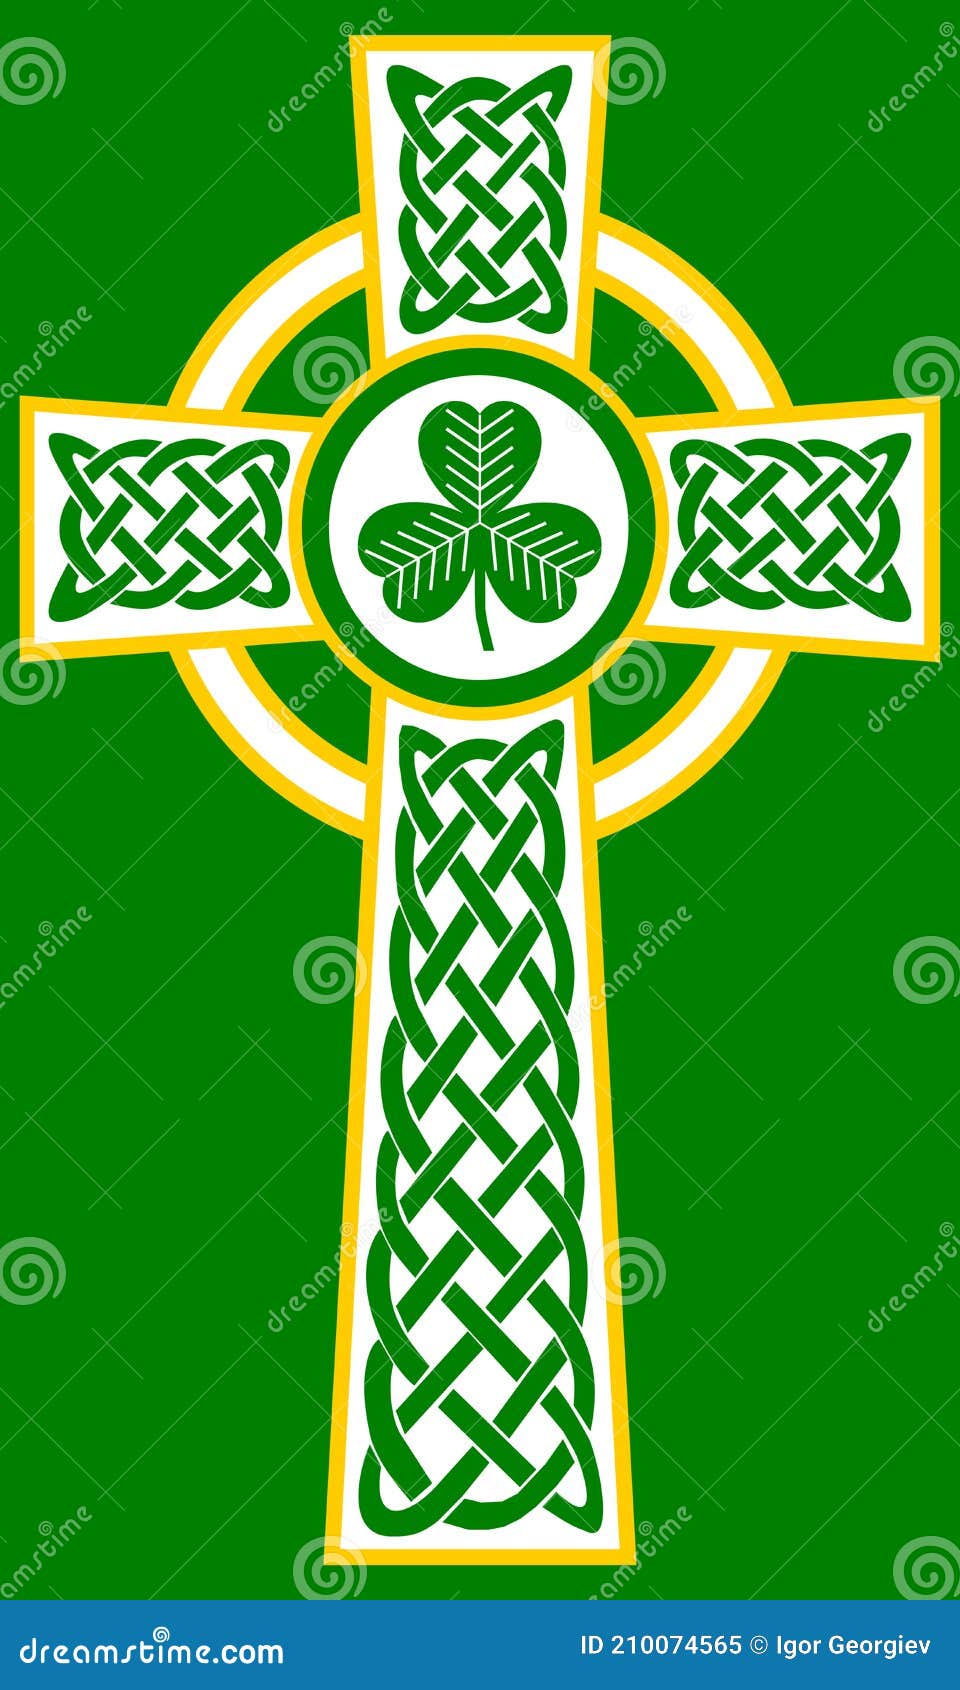 Buy Fun Express  Shamrock Patterned Tattoos for St Patricks Day   Apparel Accessories  Temporary Tattoos  Regular Tattoos  St Patricks  Day  72 Pieces Online at desertcartINDIA